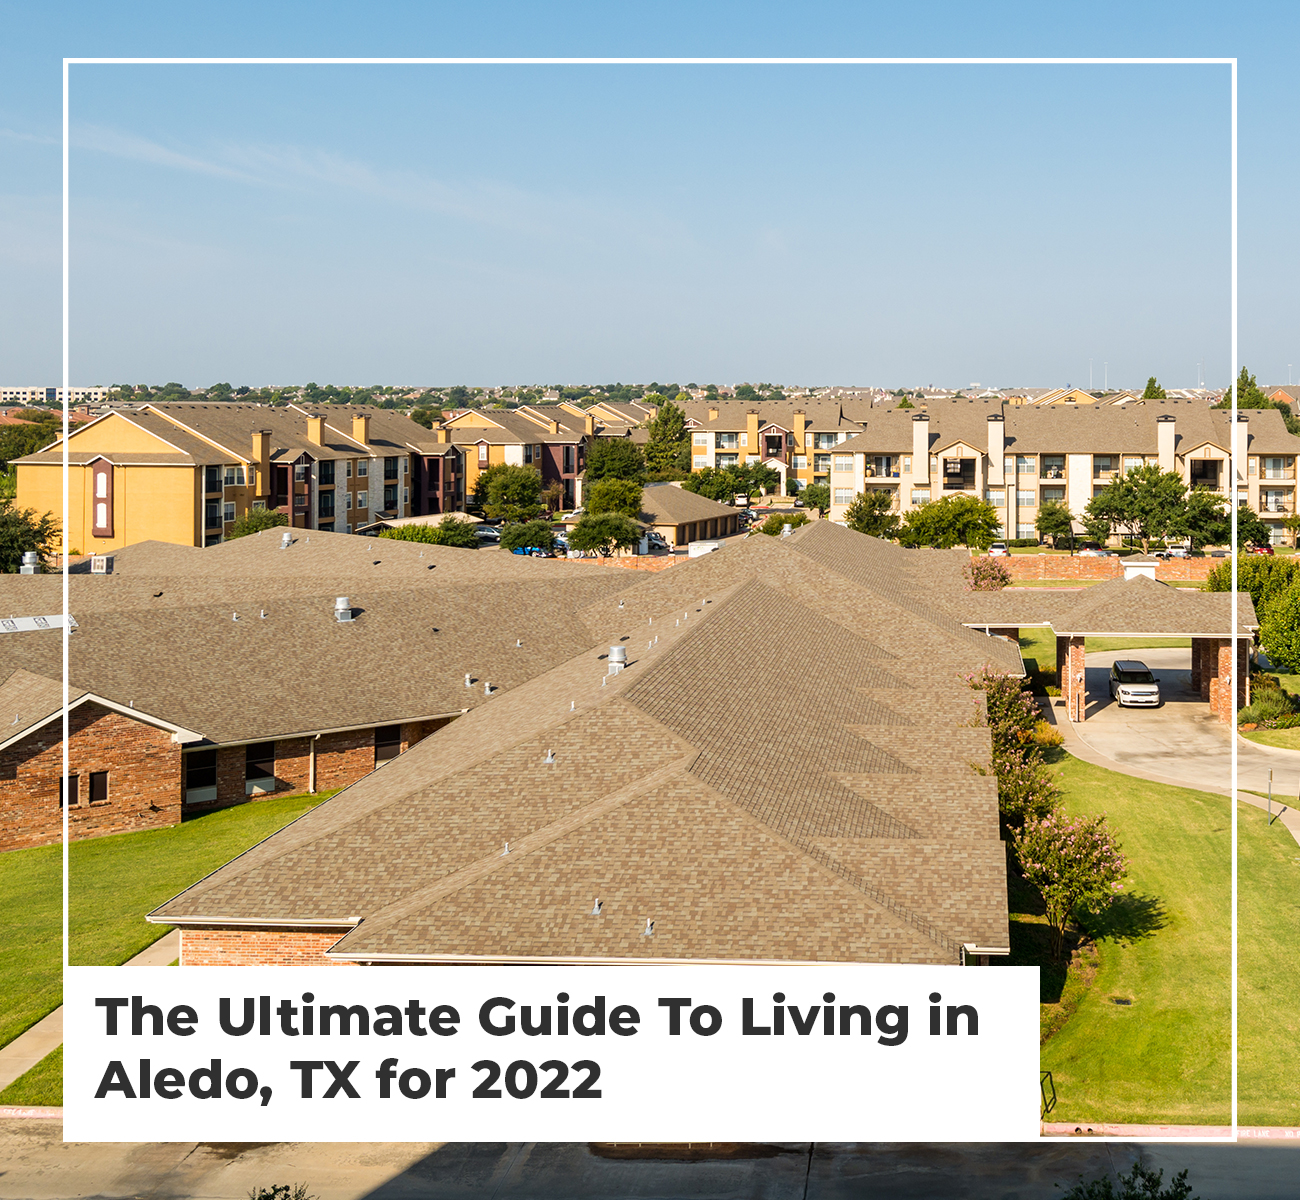 The Ultimate Guide To Living in Aledo, TX for 2022